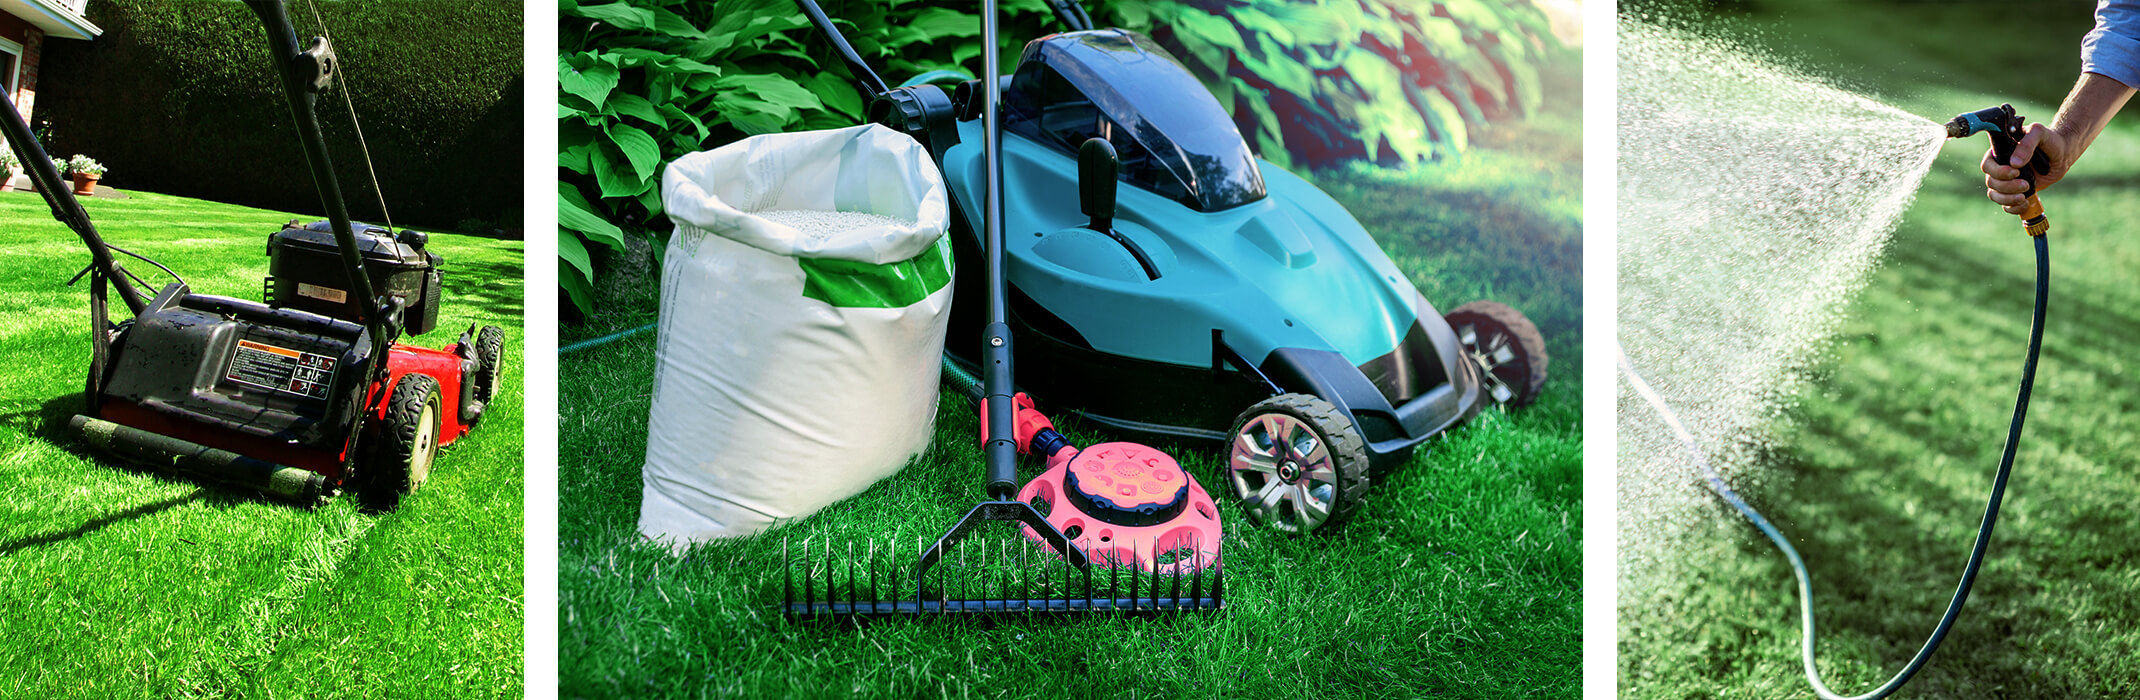 3 images: a healthy lawn being mowed; a lush lawn and plants with a lawn mower, a rake, a lawn sprinkler and white bag; someone spraying water on or near their lawn